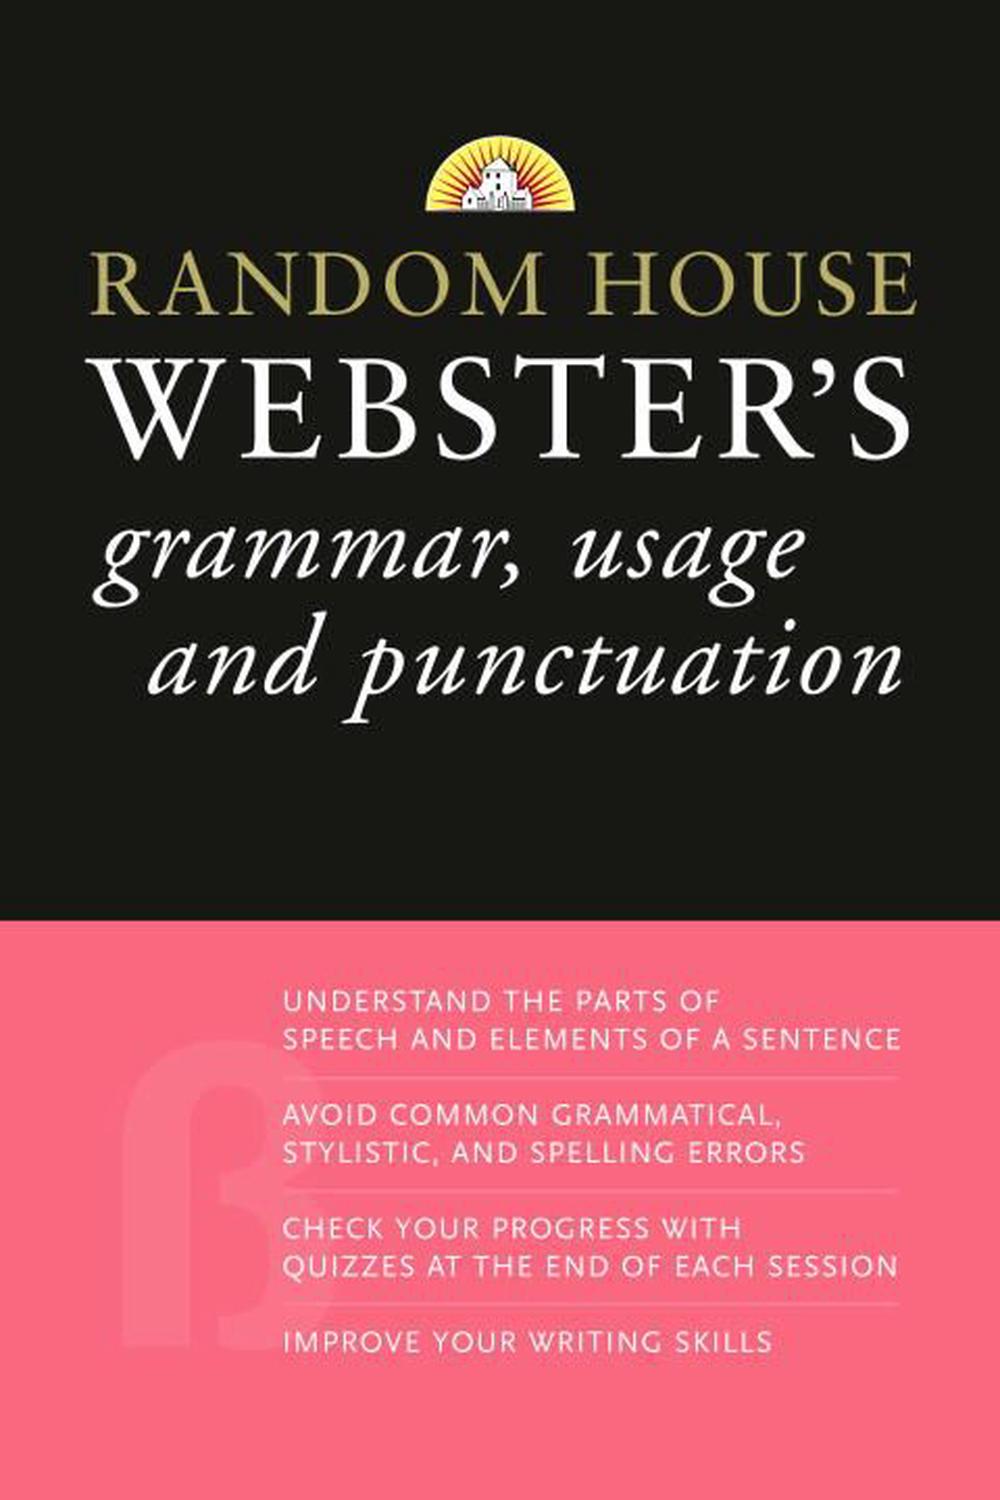 Random House Webster's Grammar, Usage, and Punctuation by Random House, Paperback, 9780375722769